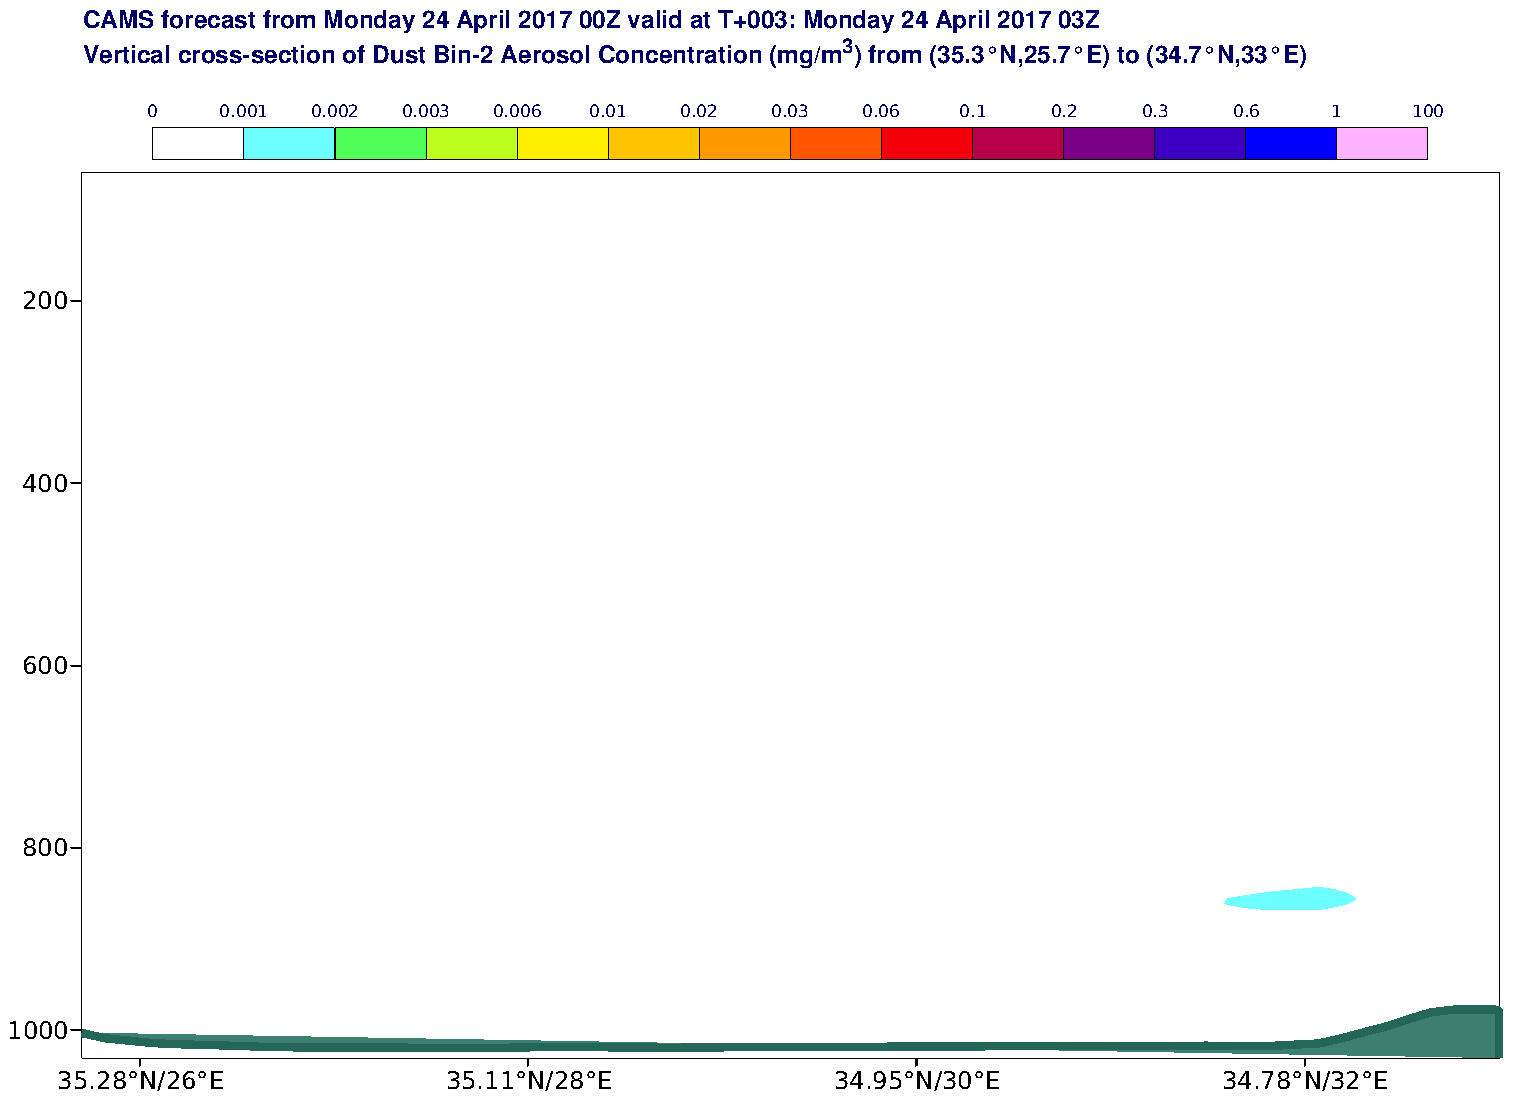 Vertical cross-section of Dust Bin-2 Aerosol Concentration (mg/m3) valid at T3 - 2017-04-24 03:00